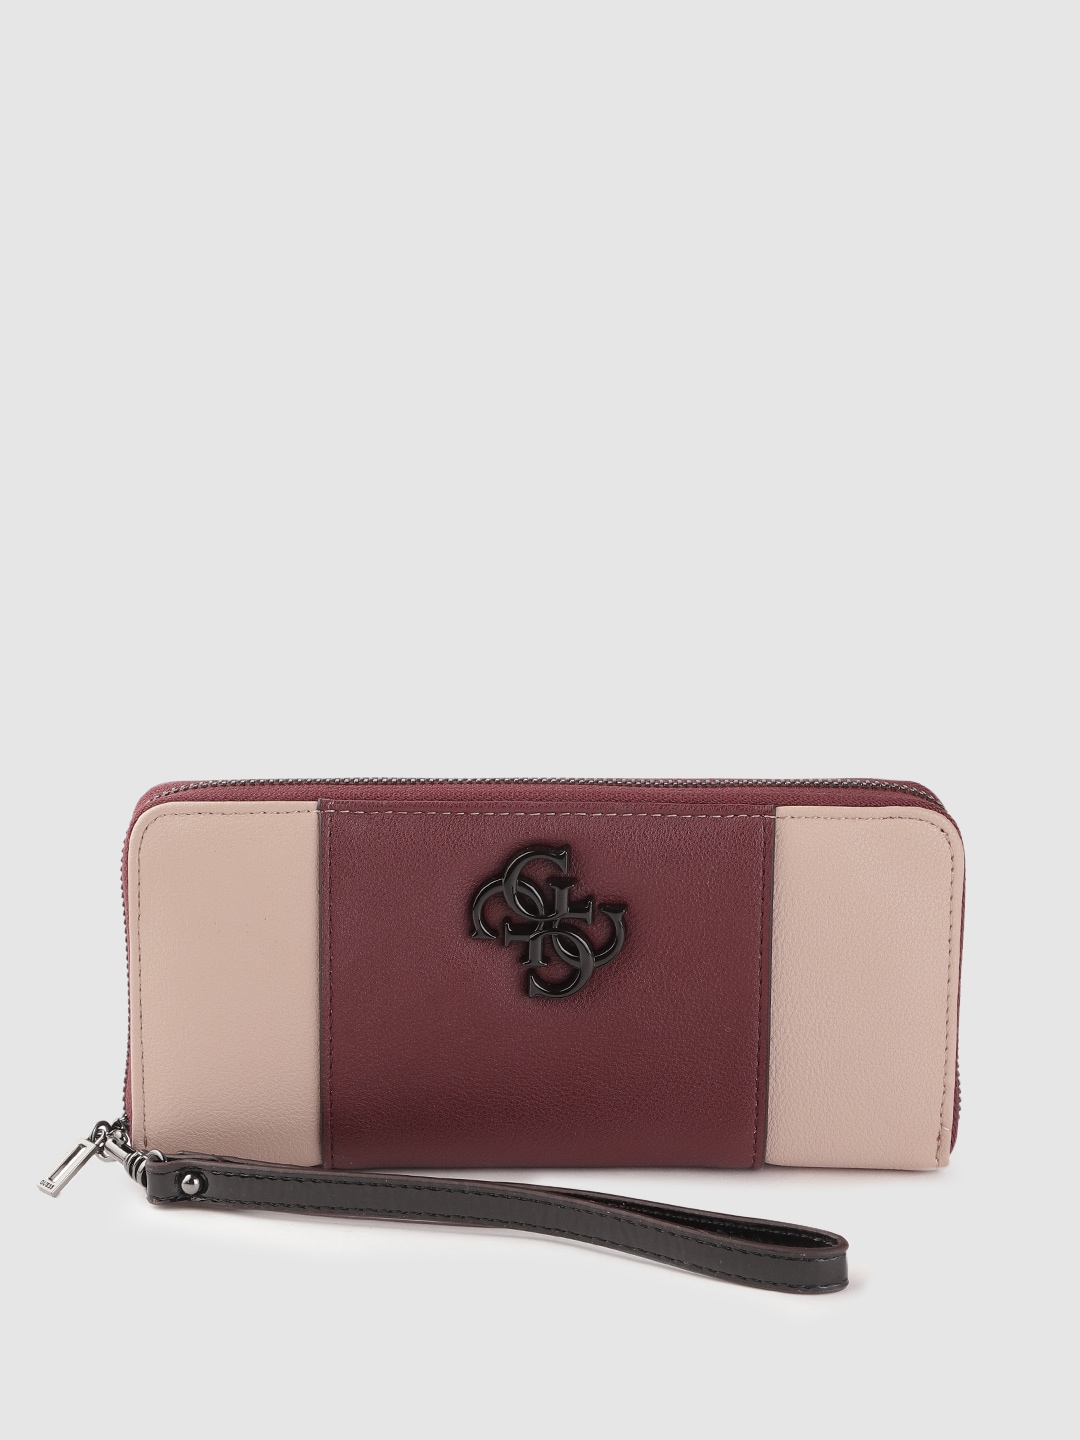 GUESS Women Burgundy & Nude-Coloured Colourblocked Zip Around Wallet Price in India